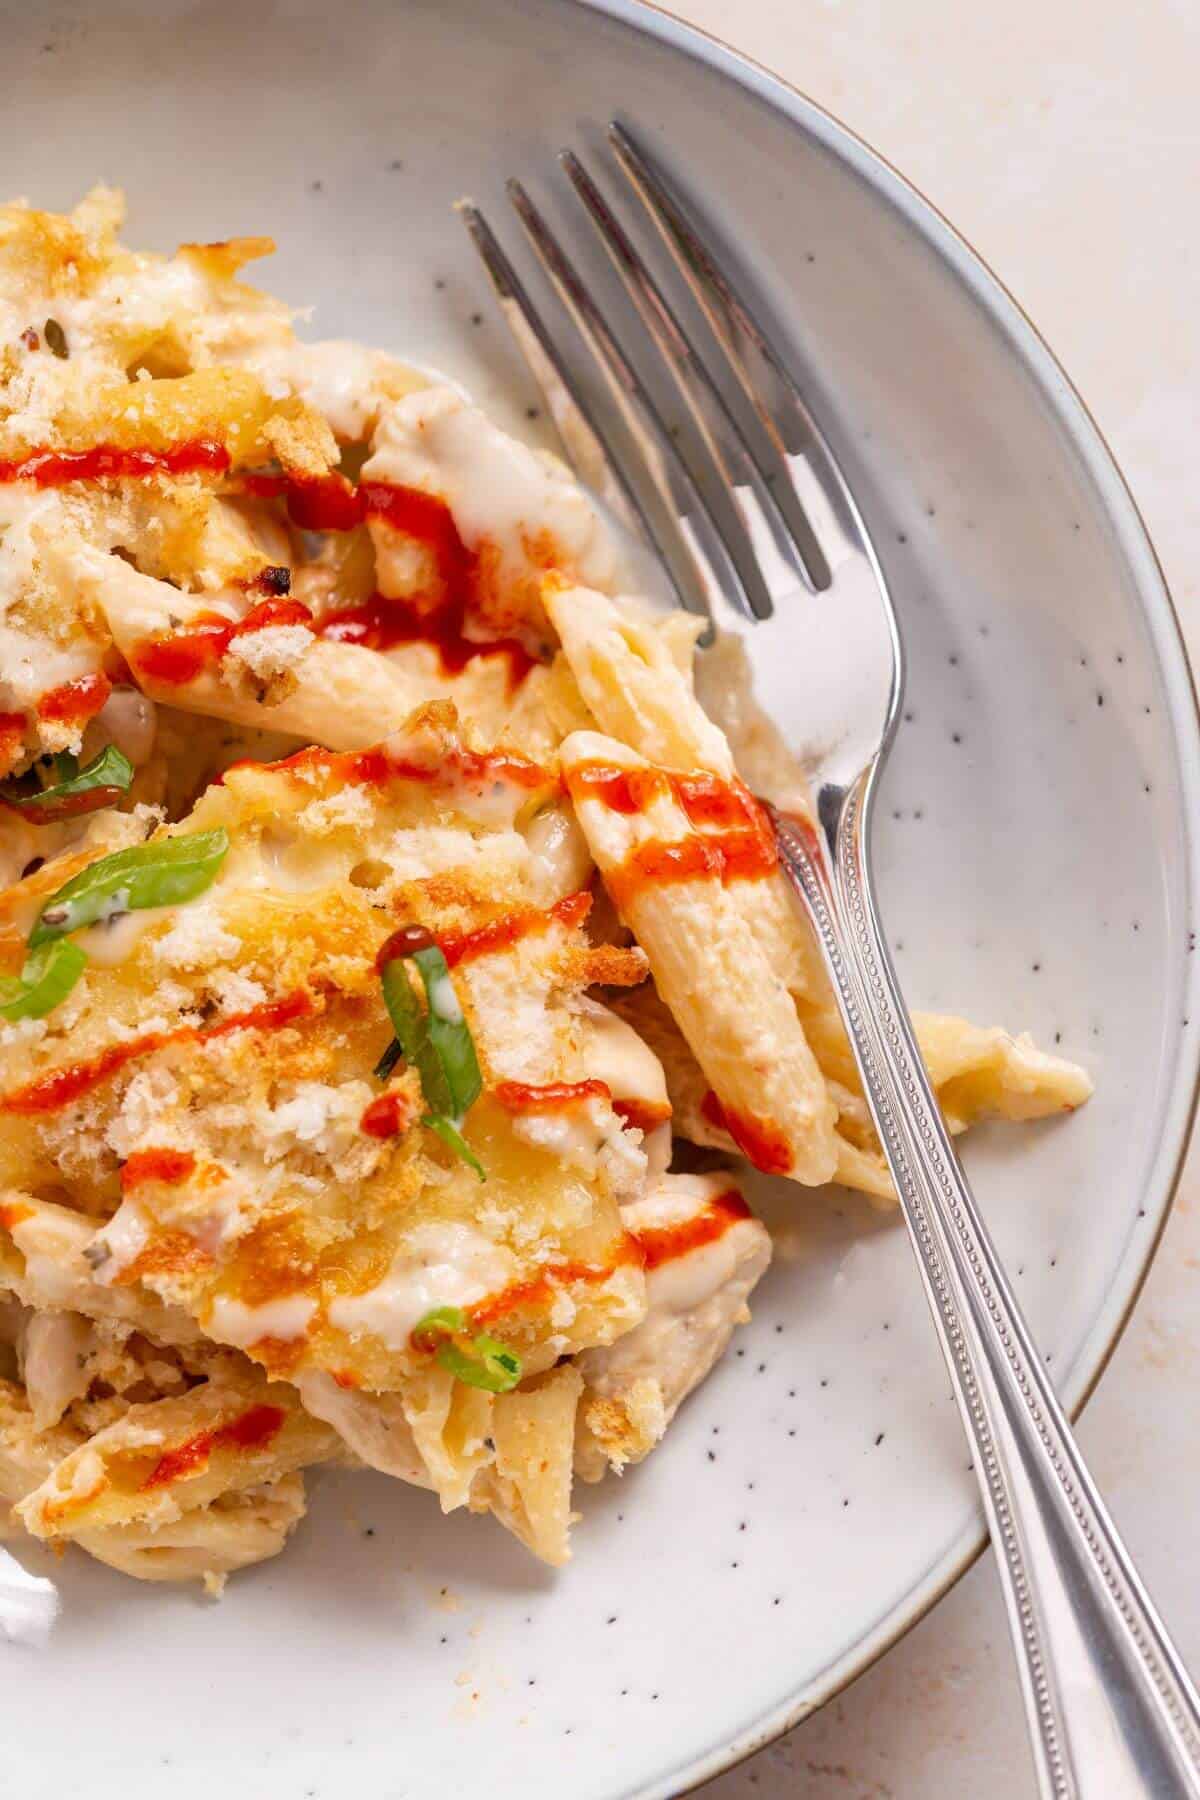 Buffalo chicken pasta bake on serving plate with fork.